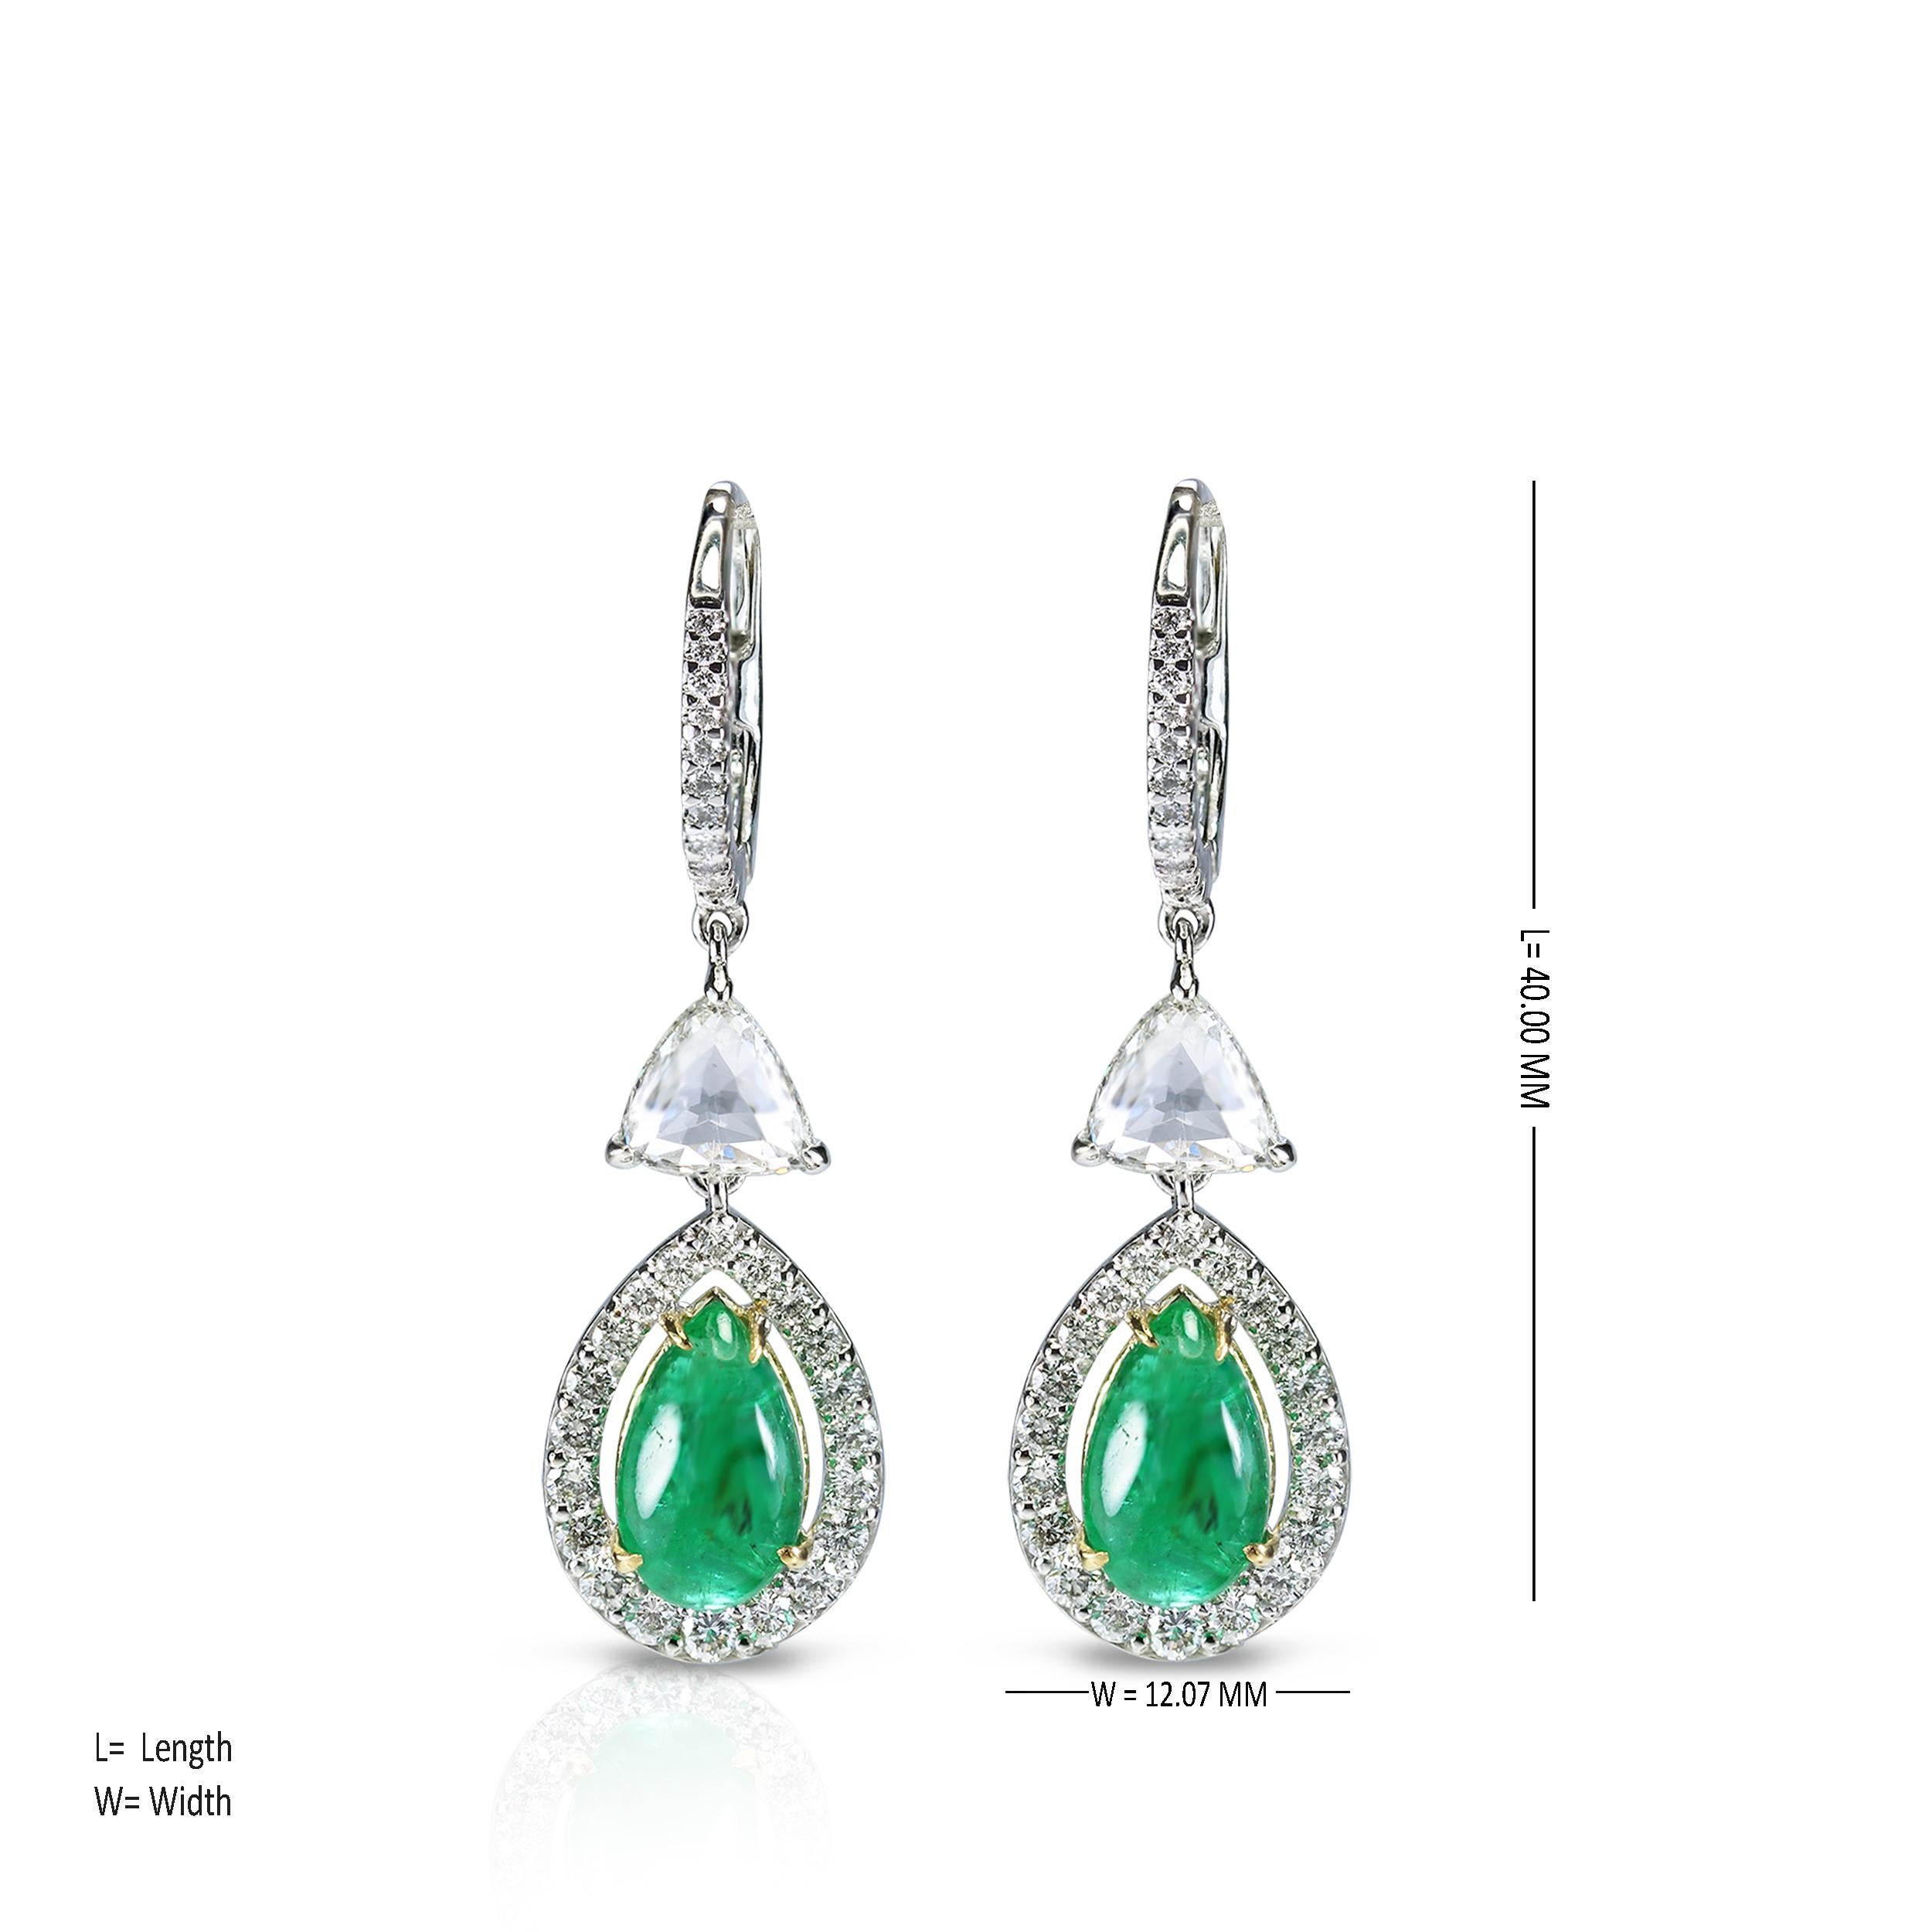 Studio Rêves Trillion Rose Cut and Emerald Dangling Earrings in 18 Karat Gold In New Condition For Sale In Mumbai, Maharashtra